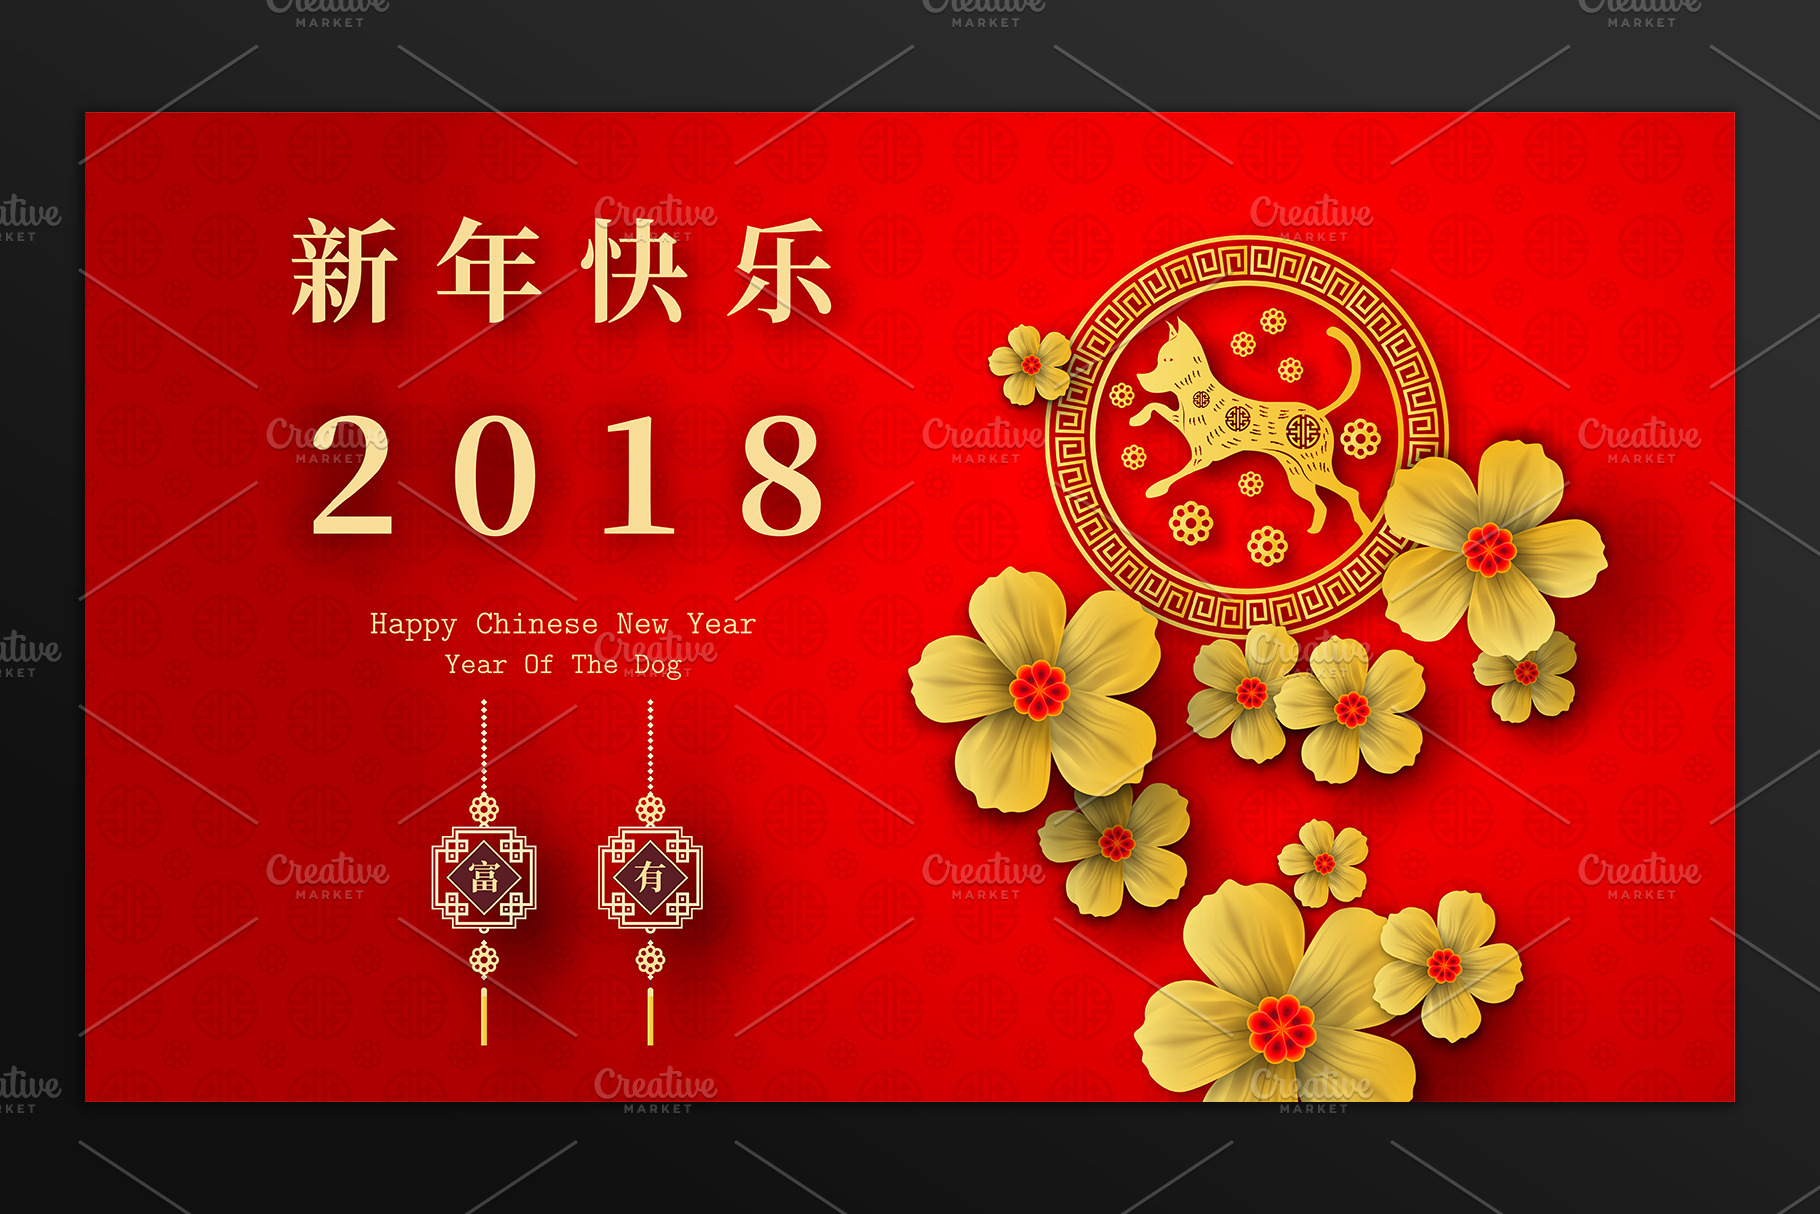 2018 Chinese New Year card ~ Card Templates ~ Creative Market1820 x 1214